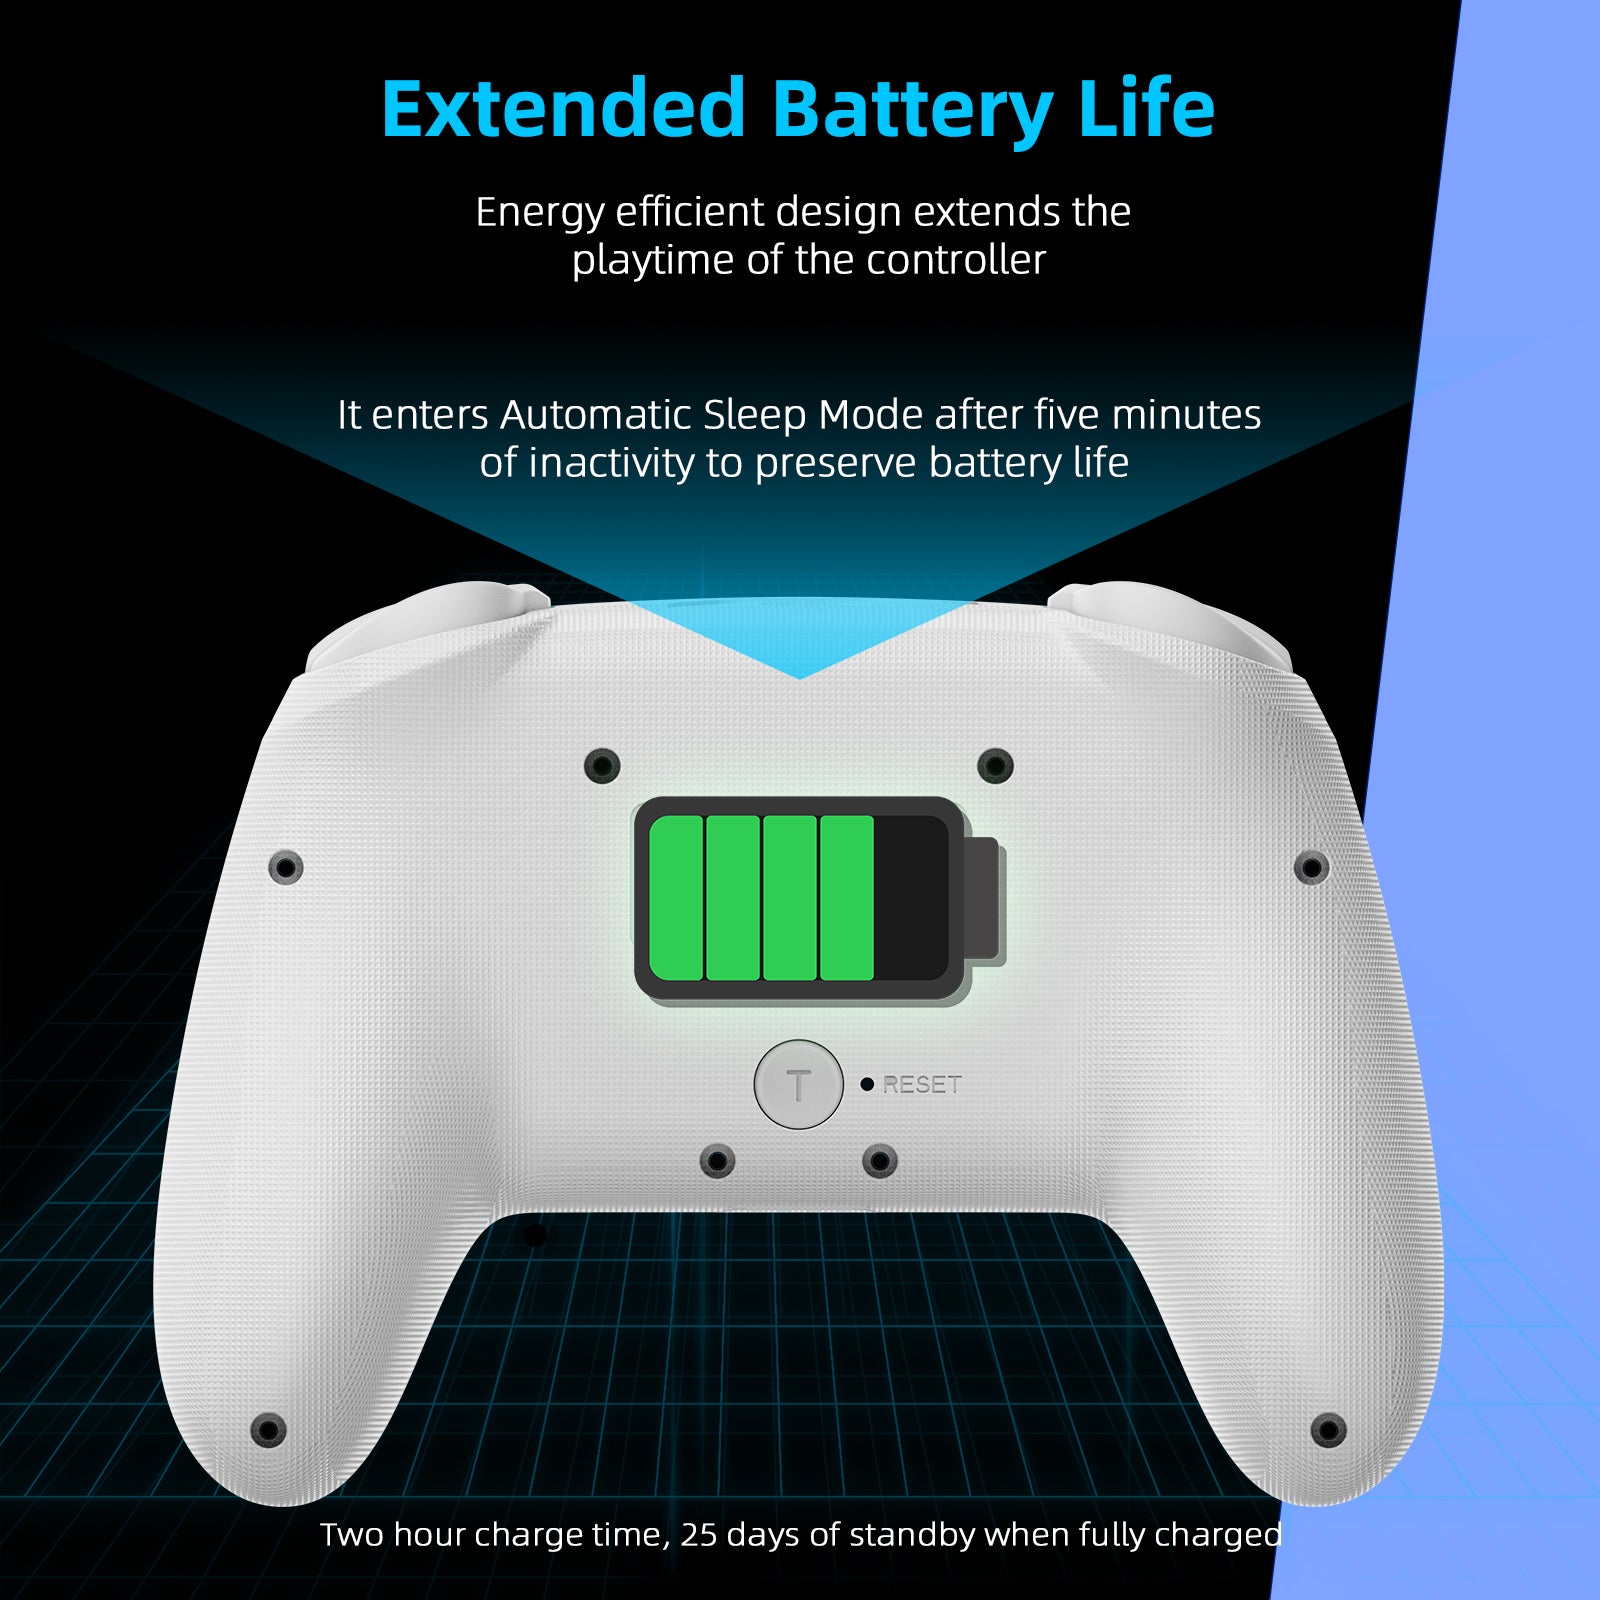 Perspective view of controller's backside highlighting energy-efficient design for extended usage. 